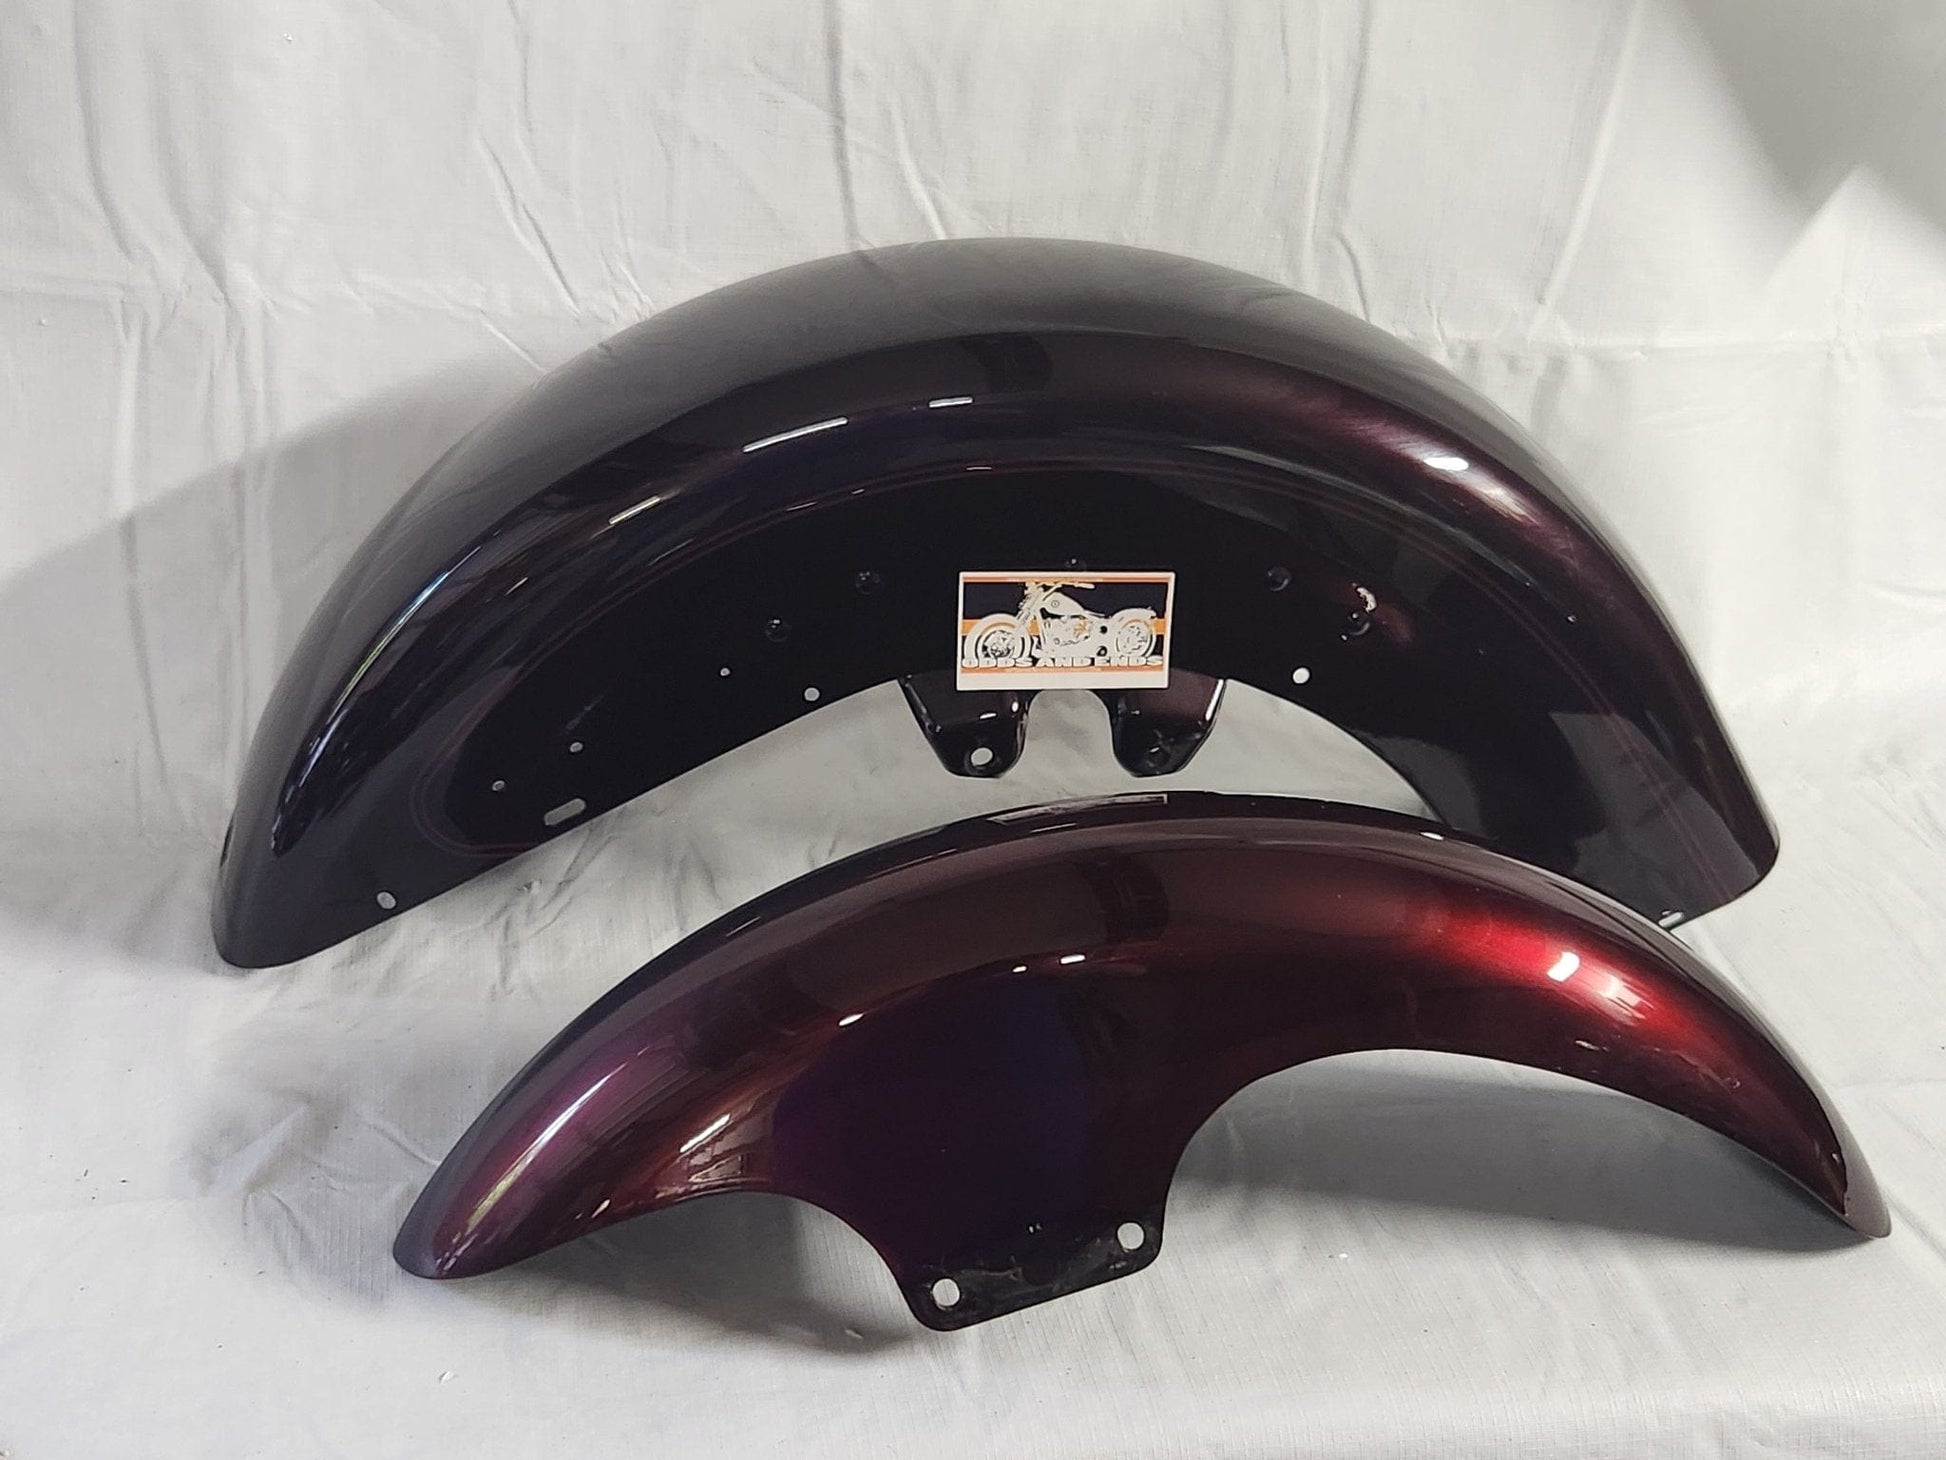 2005 TOURING Ultra Classic Electra Glide-FLHTCUI - onemotorcycleparts.com